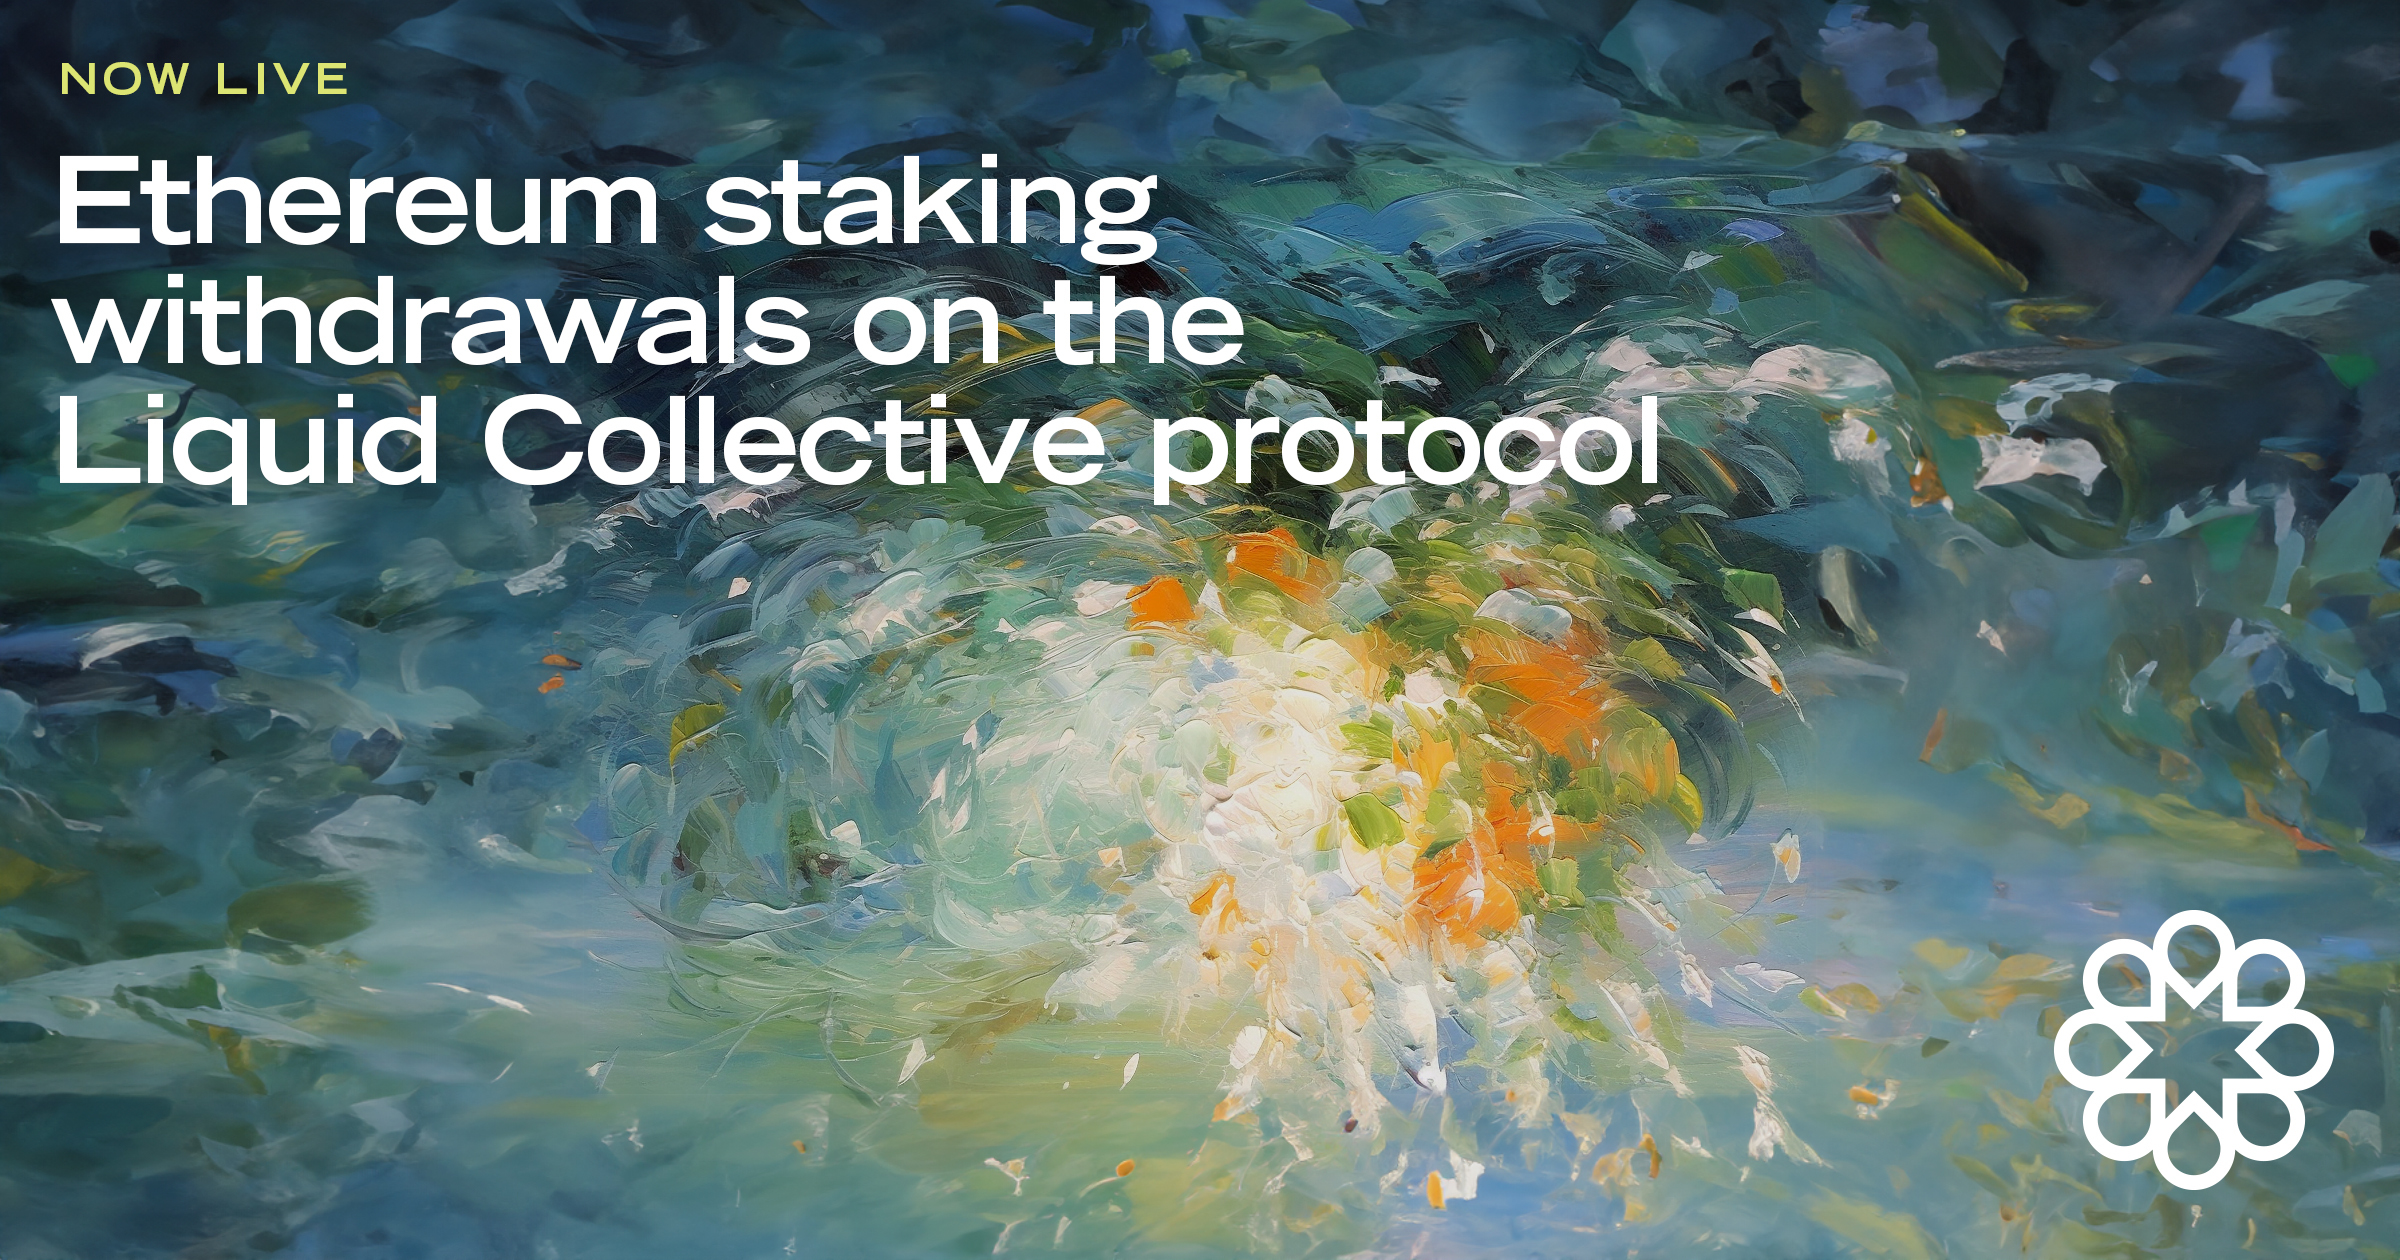 Now live: Ethereum staking withdrawals on the Liquid Collective protocol